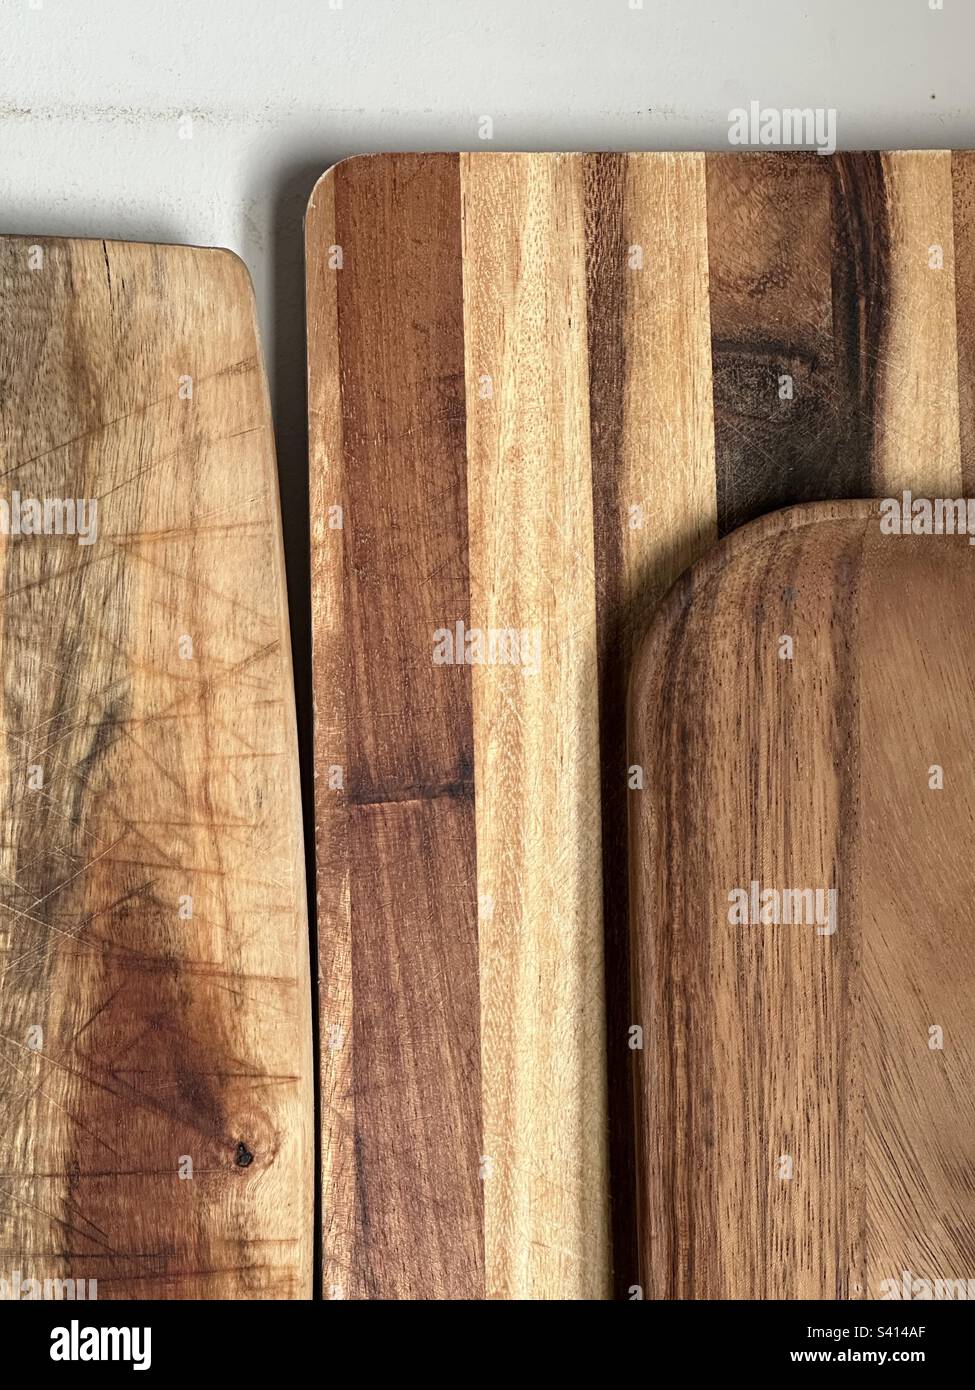 Wood Chopping Board Images – Browse 328,284 Stock Photos, Vectors, and  Video